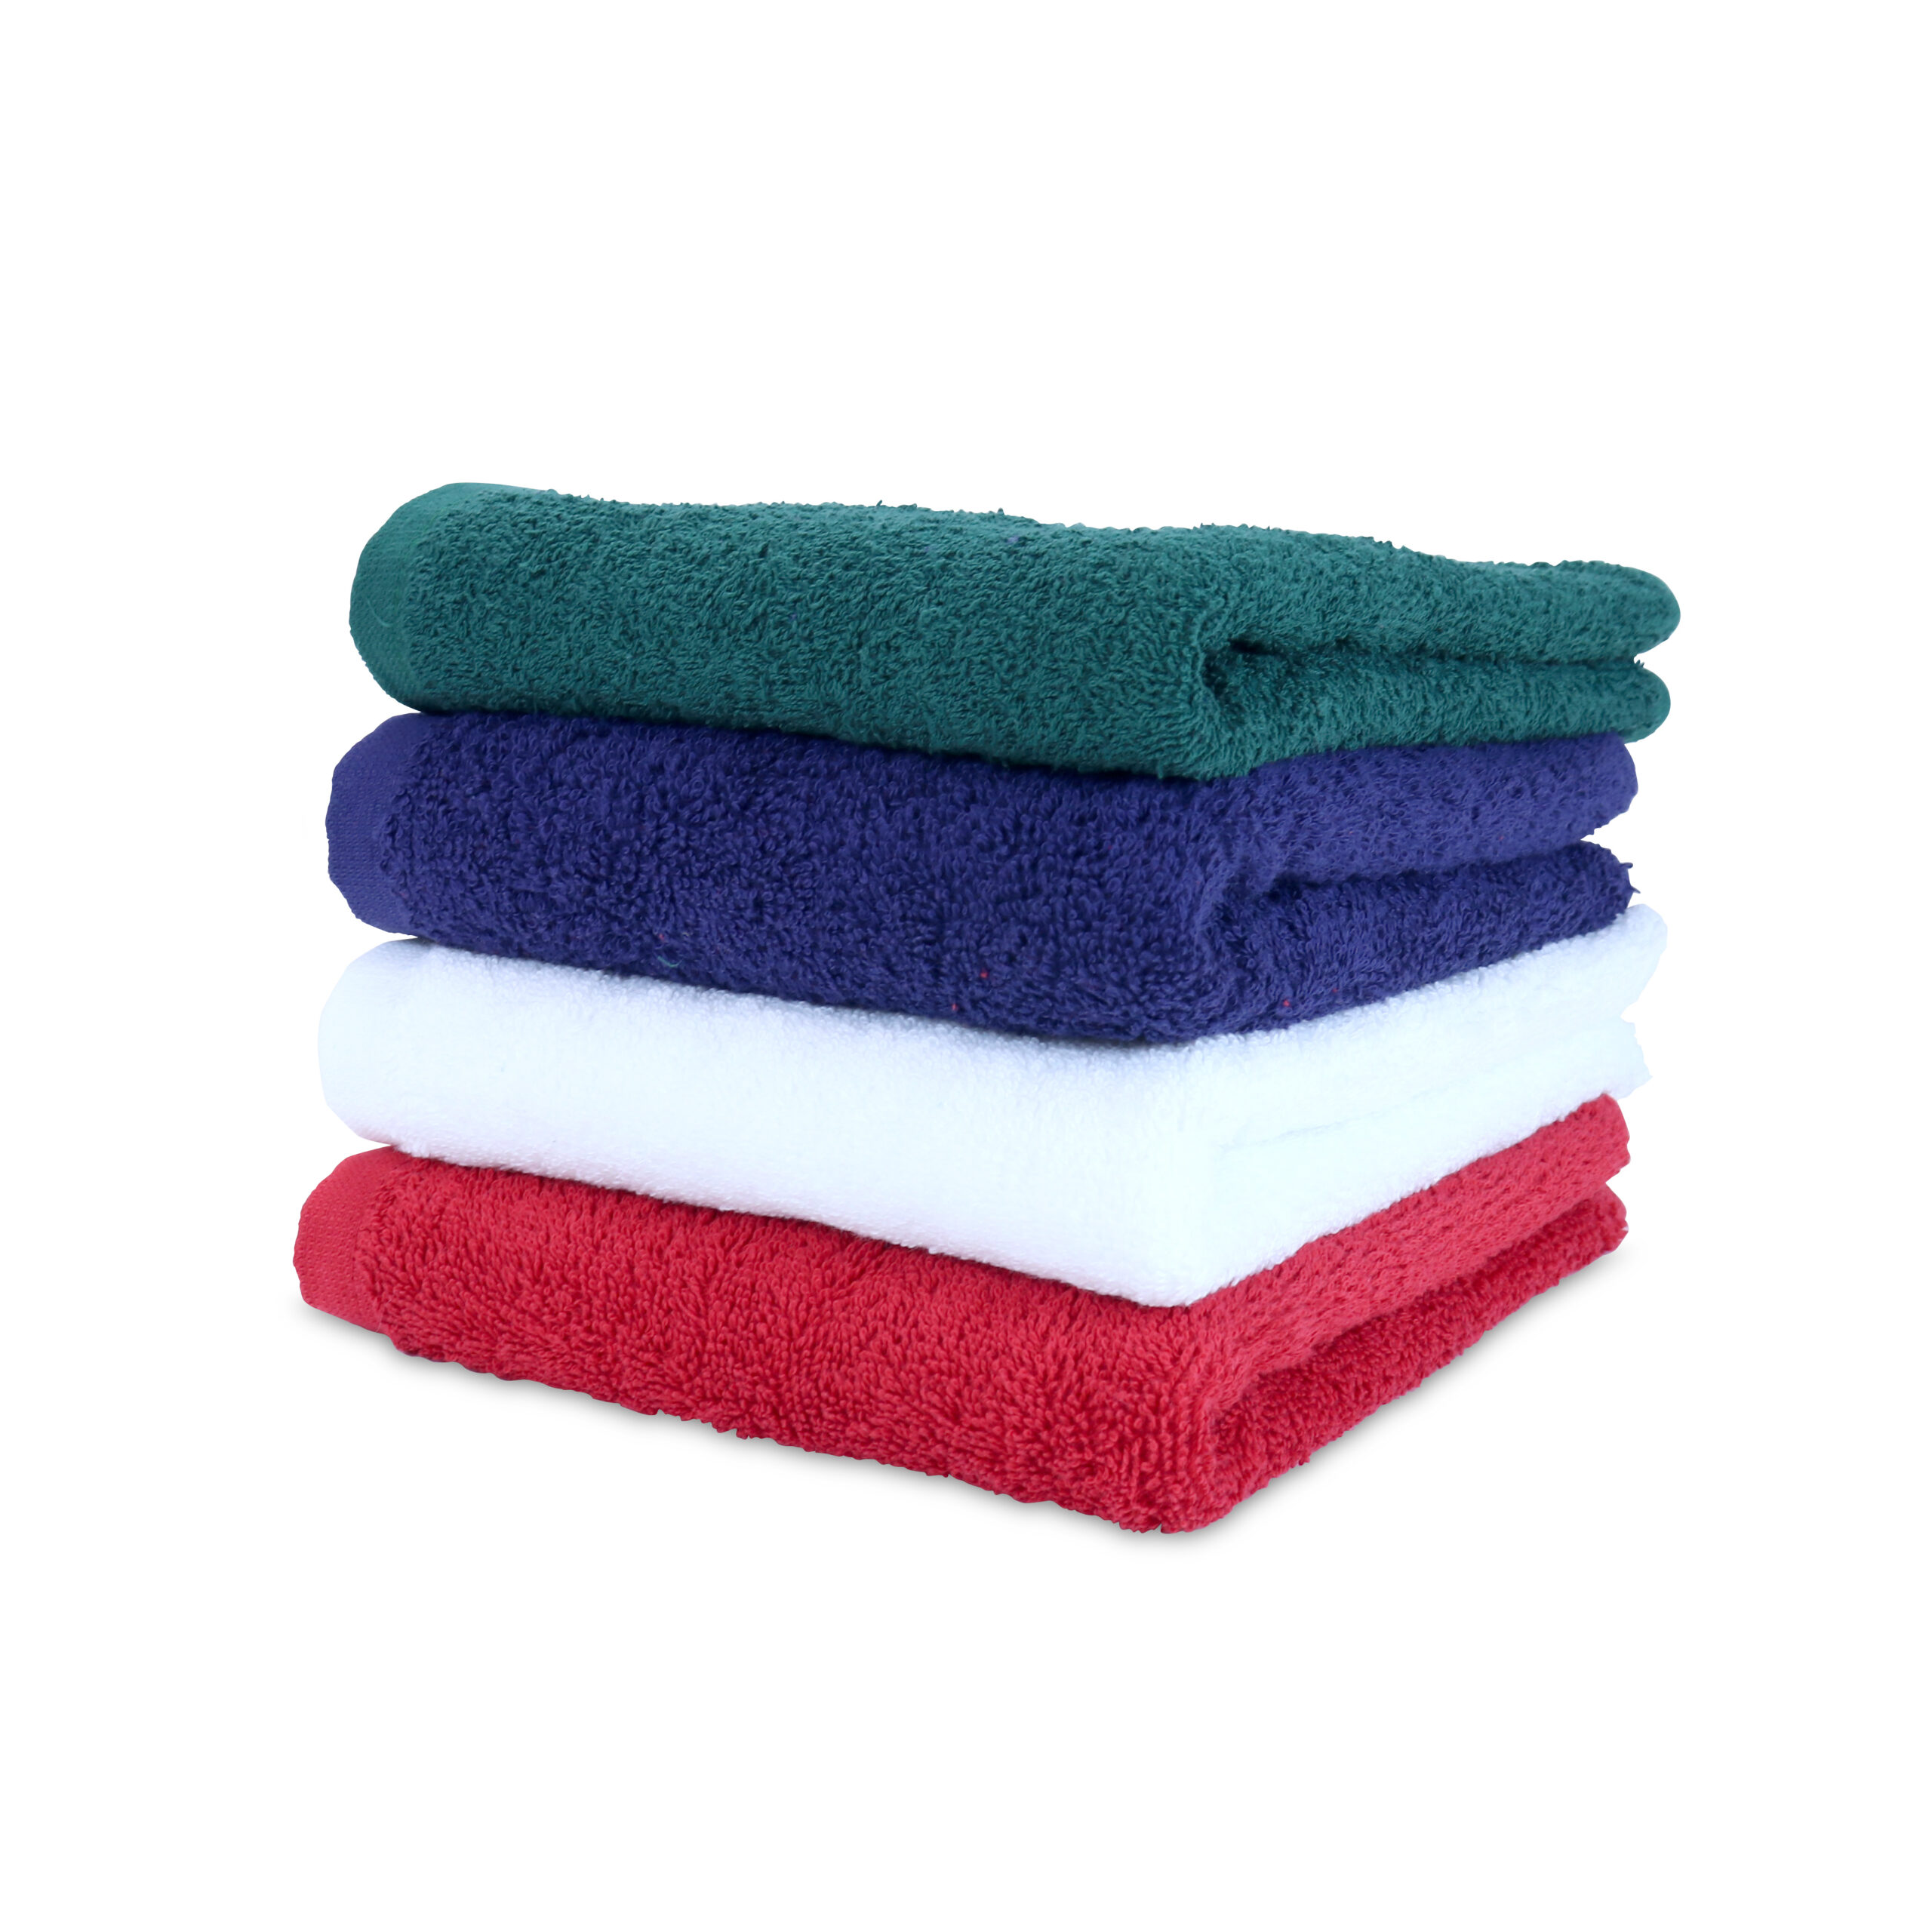 Wide Dobby Border Kitchen Towels